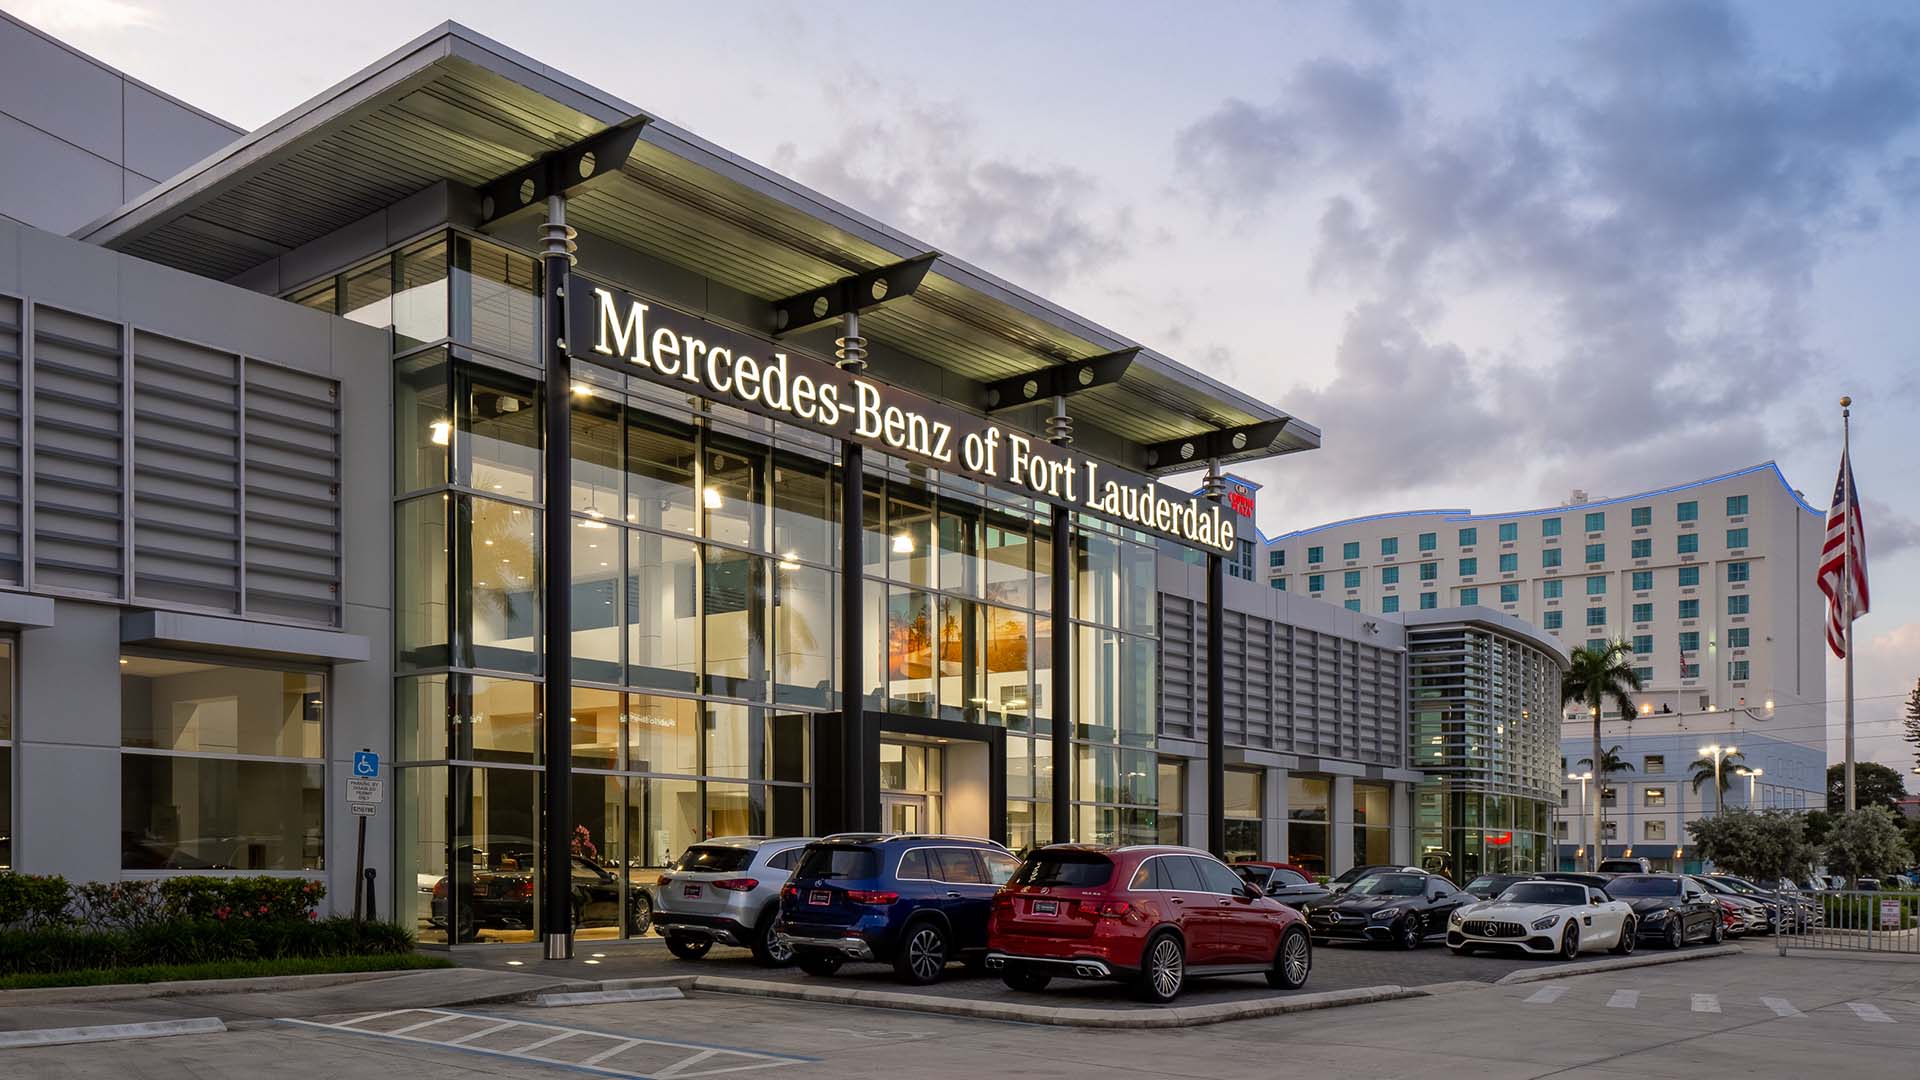 Exterior view of Mercedes-Benz of Fort Lauderdale